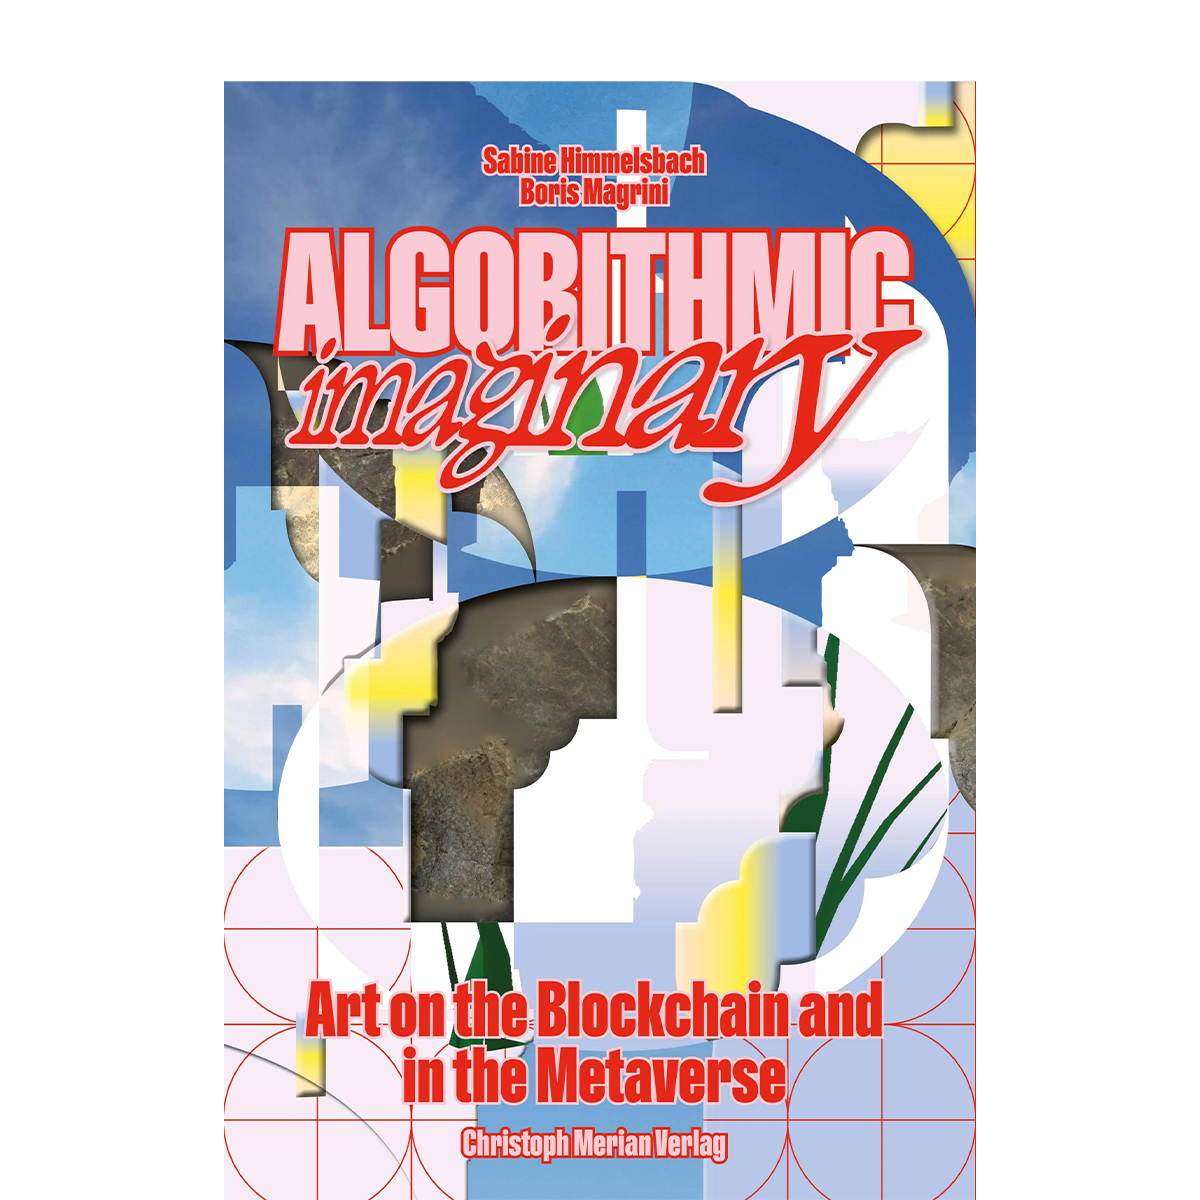 Algorithmic Imaginary Art on the Blockchain and in the Metaverse